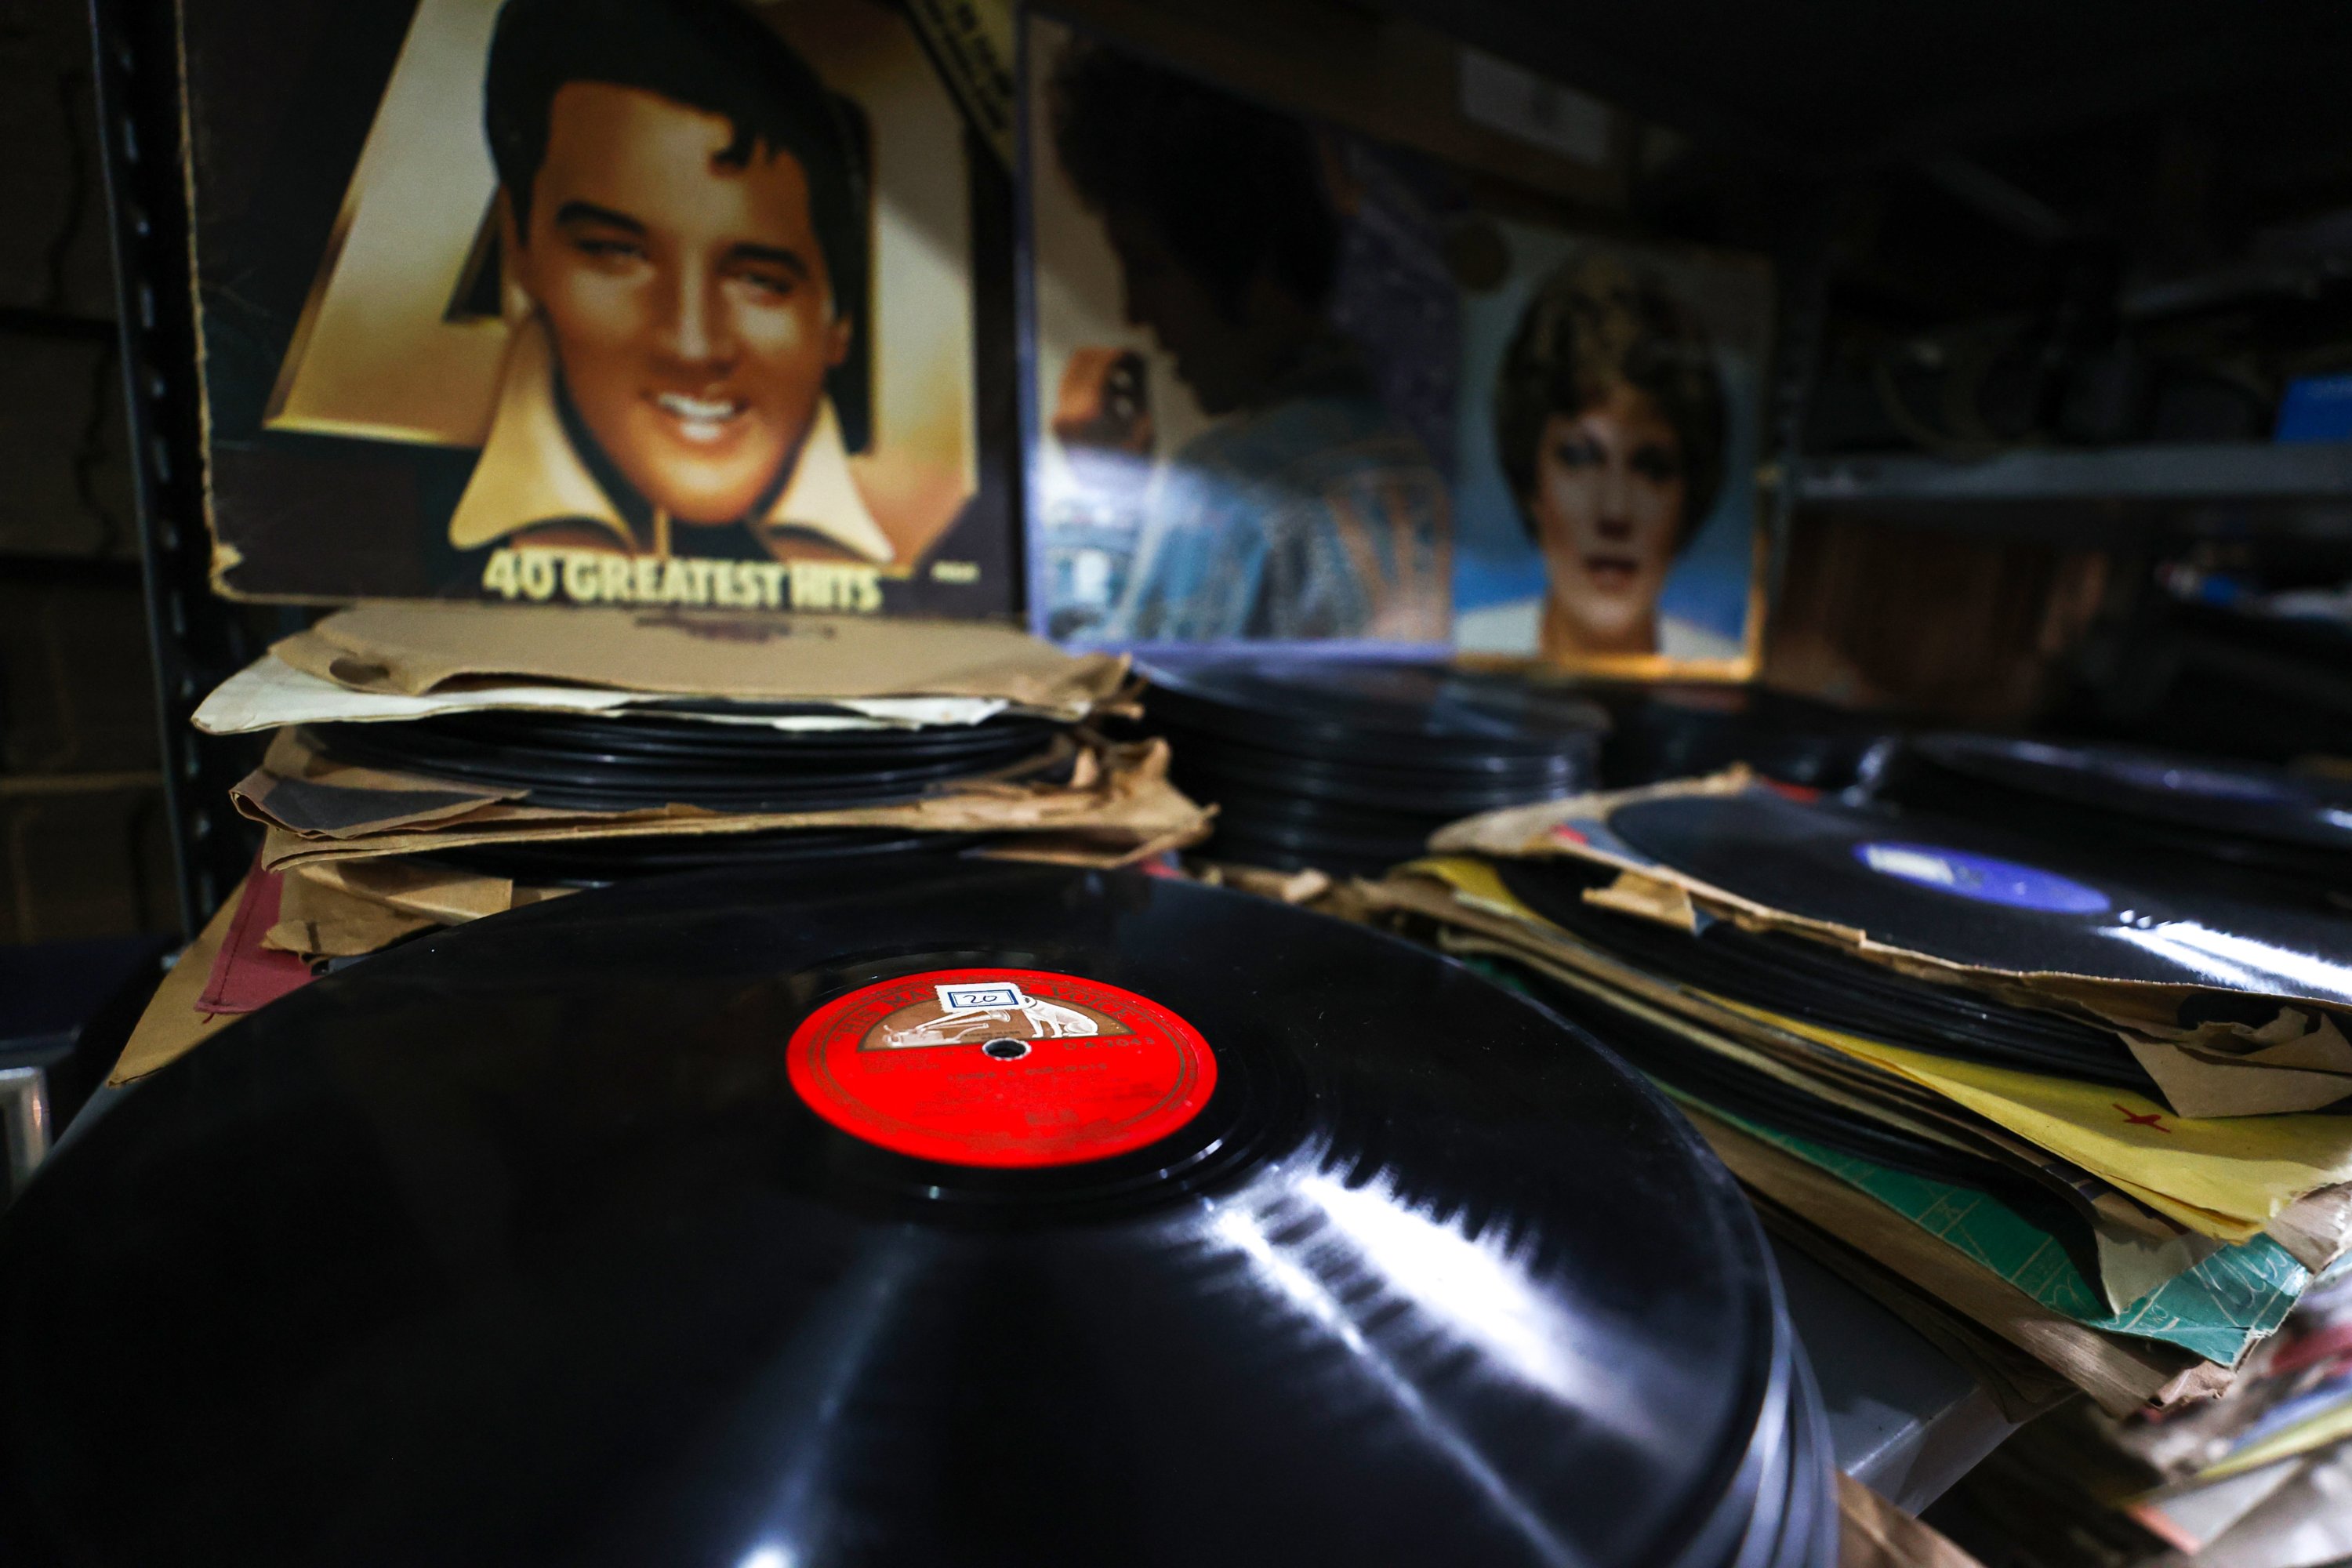 Some vinyl records on display with famous singer Elvis Presley